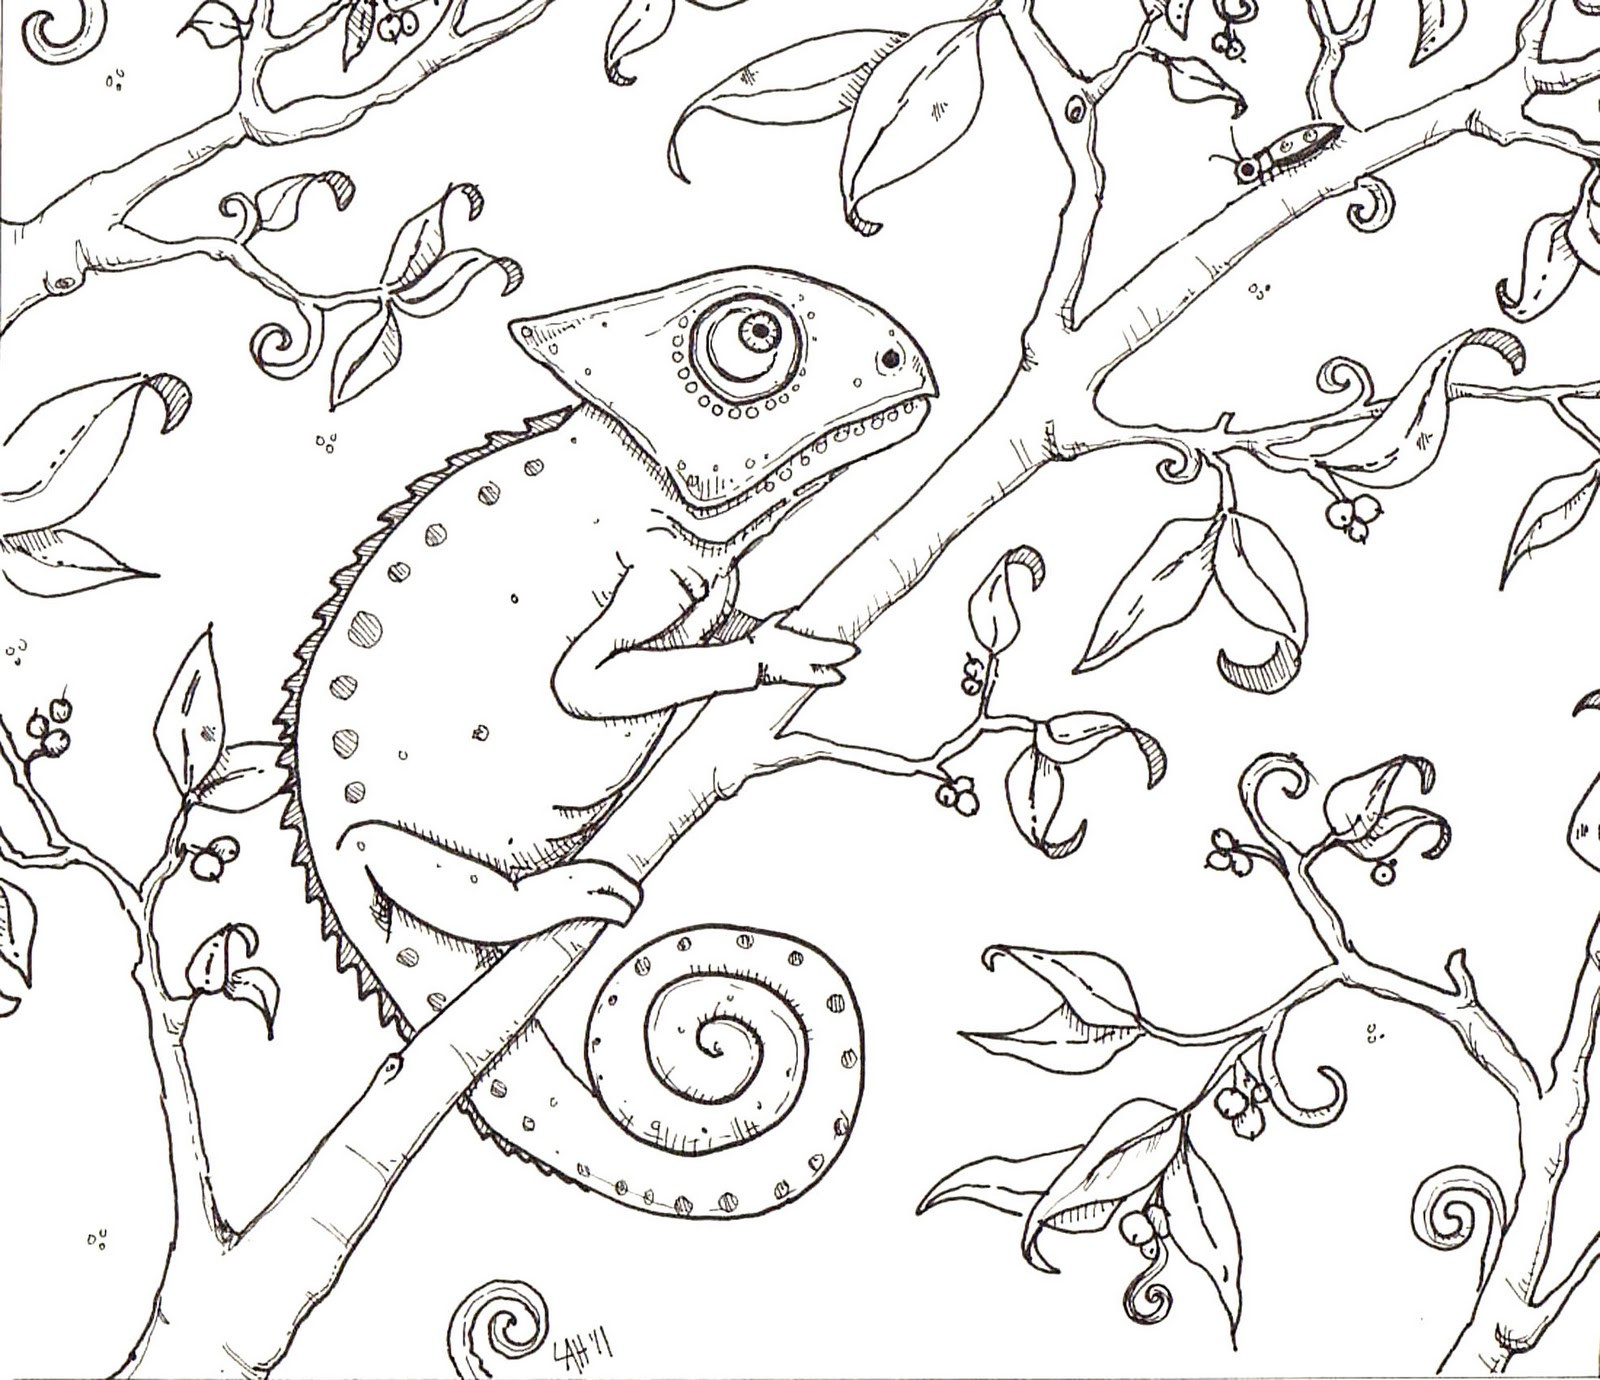 Cameleon Coloring Pages
 Chameleon Coloring Pages Free Printable Chameleon